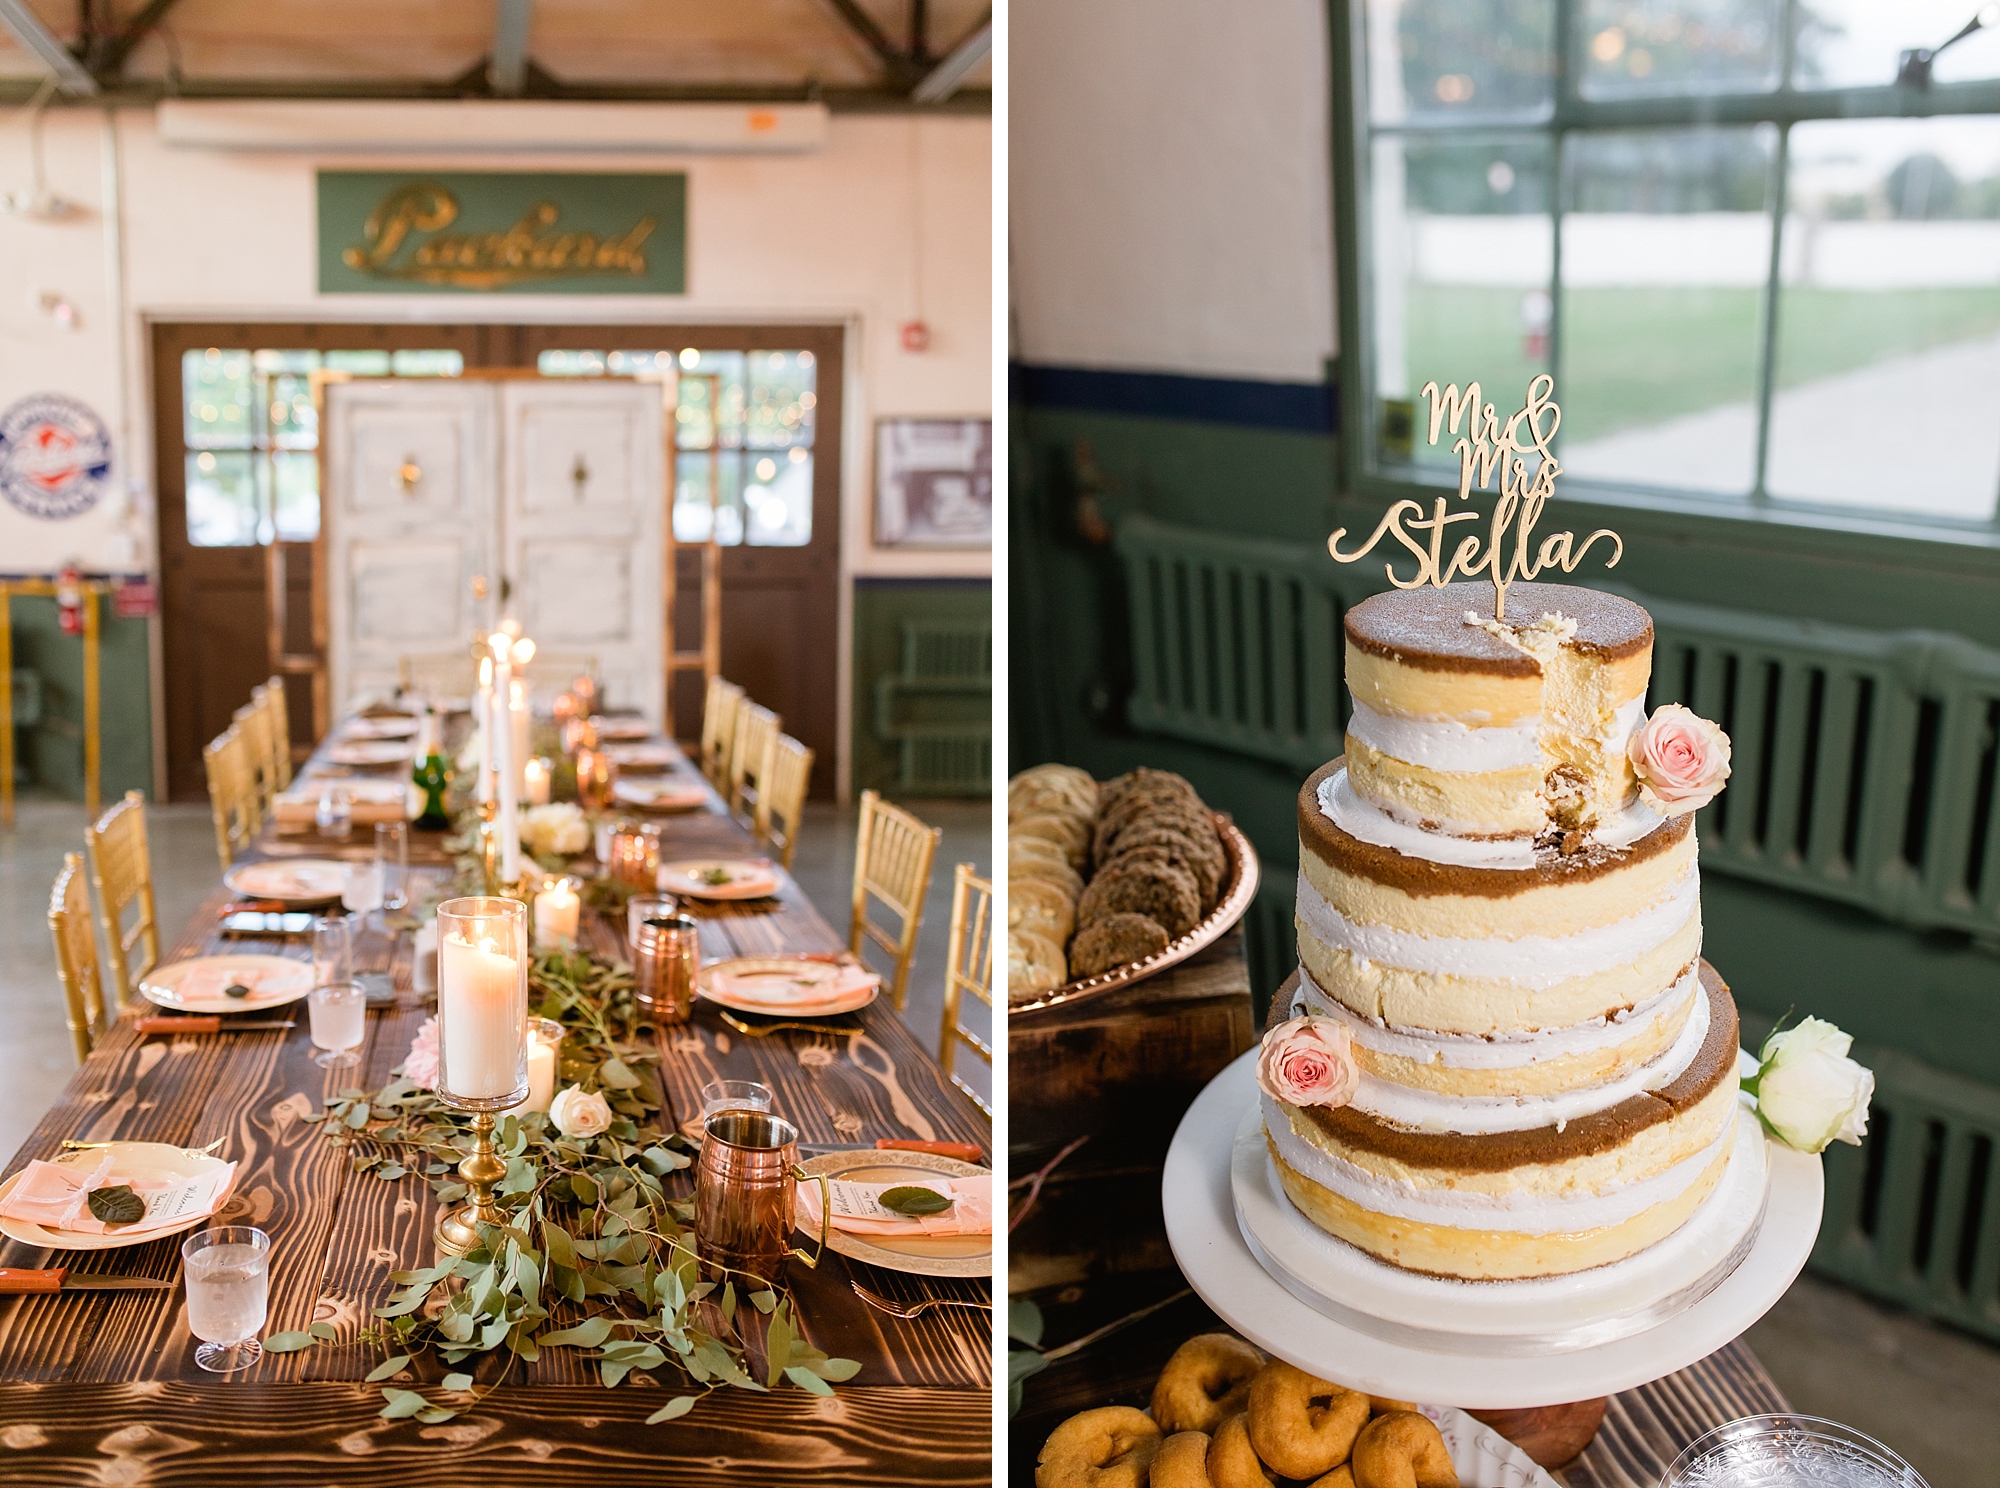 A classic blush and gold late summer wedding at Packard Proving Grounds in Shelby Township, Michigan by Breanne Rochelle Photography.